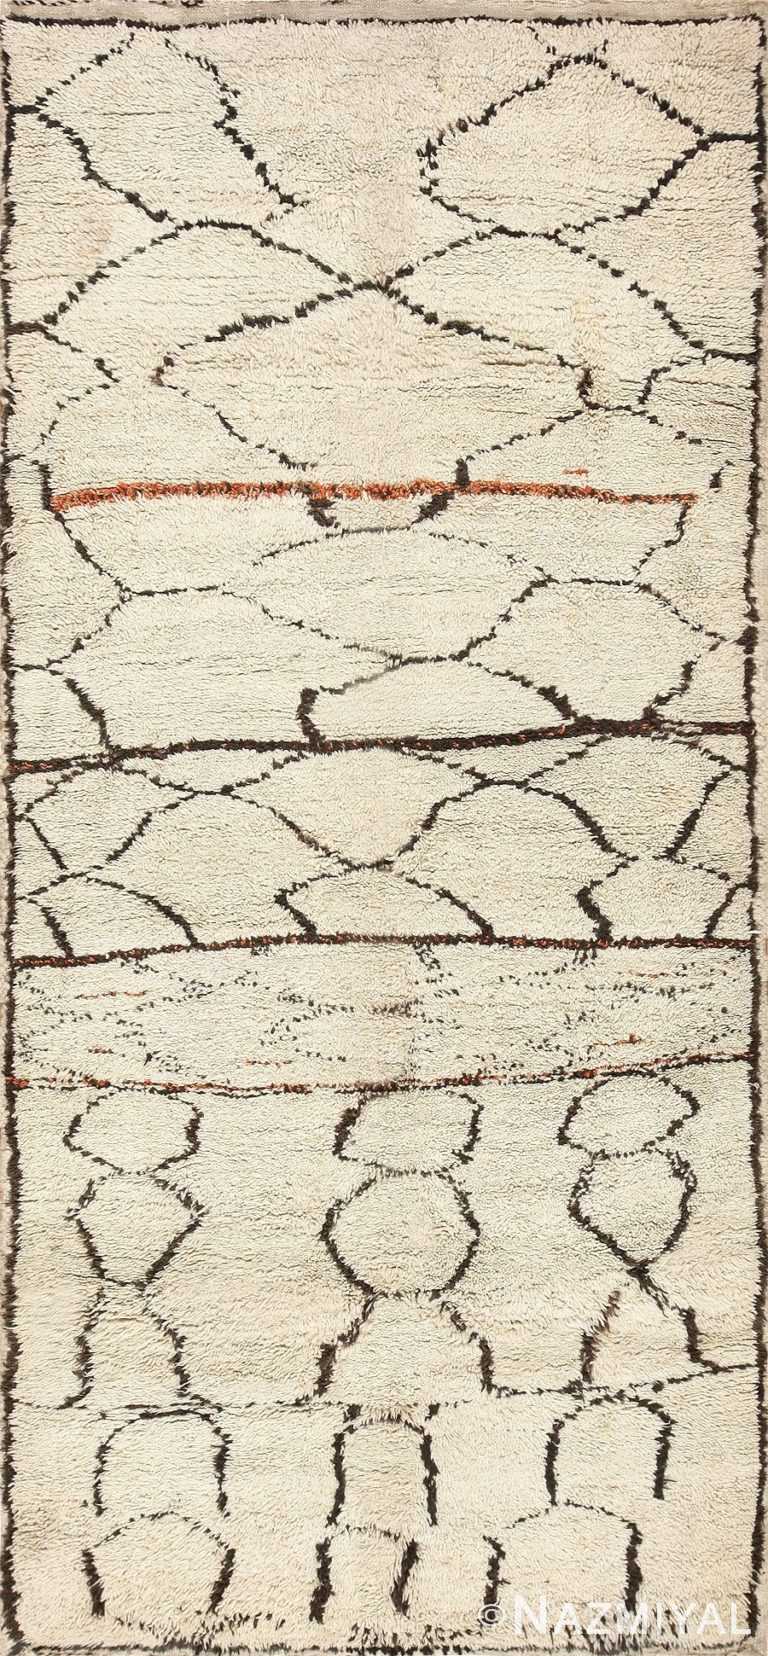 Ivory and Black Beni Ourain Moroccan Rug 47927 Detail/Large View